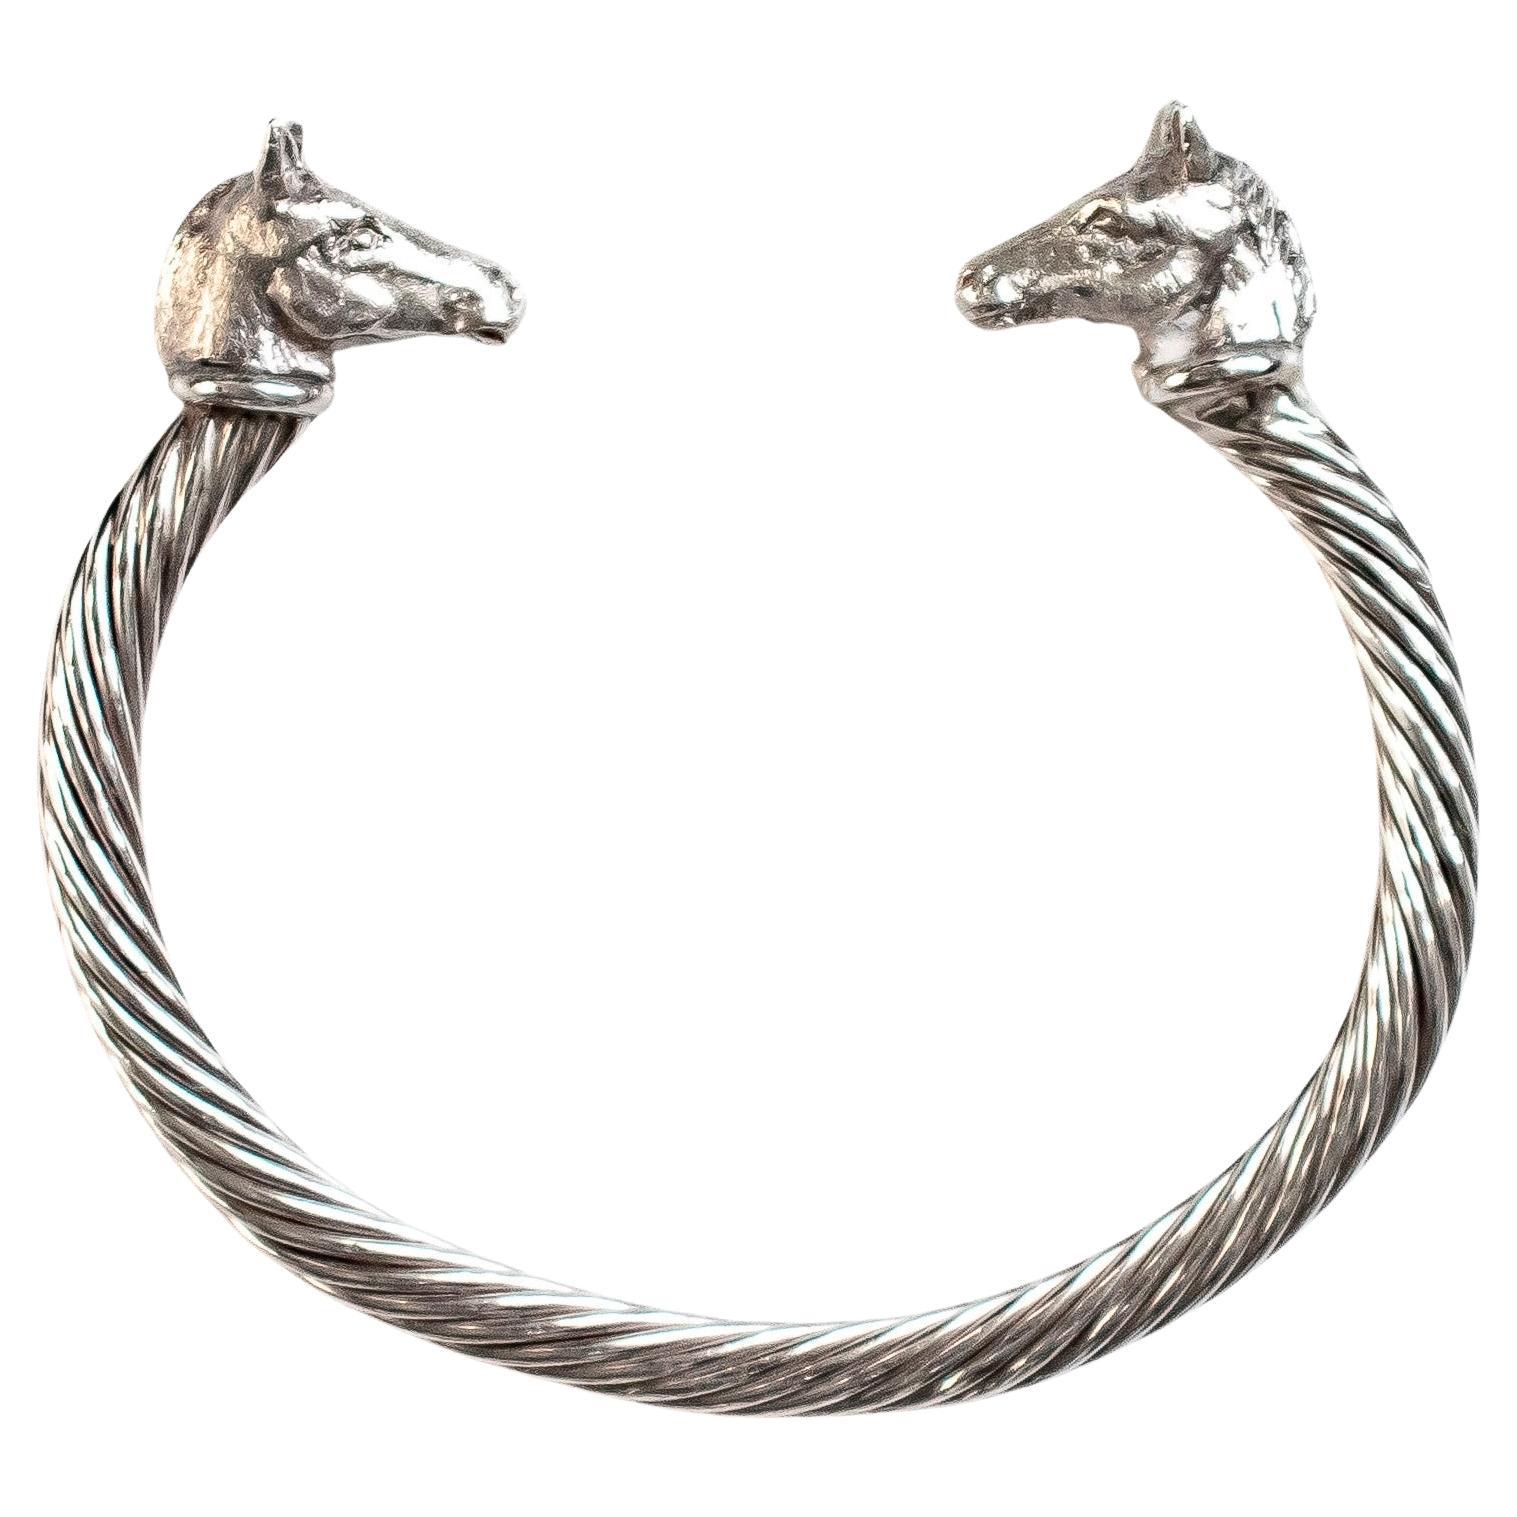 Paul Eaton Sculpted Pony Köpfe auf Sterling Silber Twisted Armreif Armband